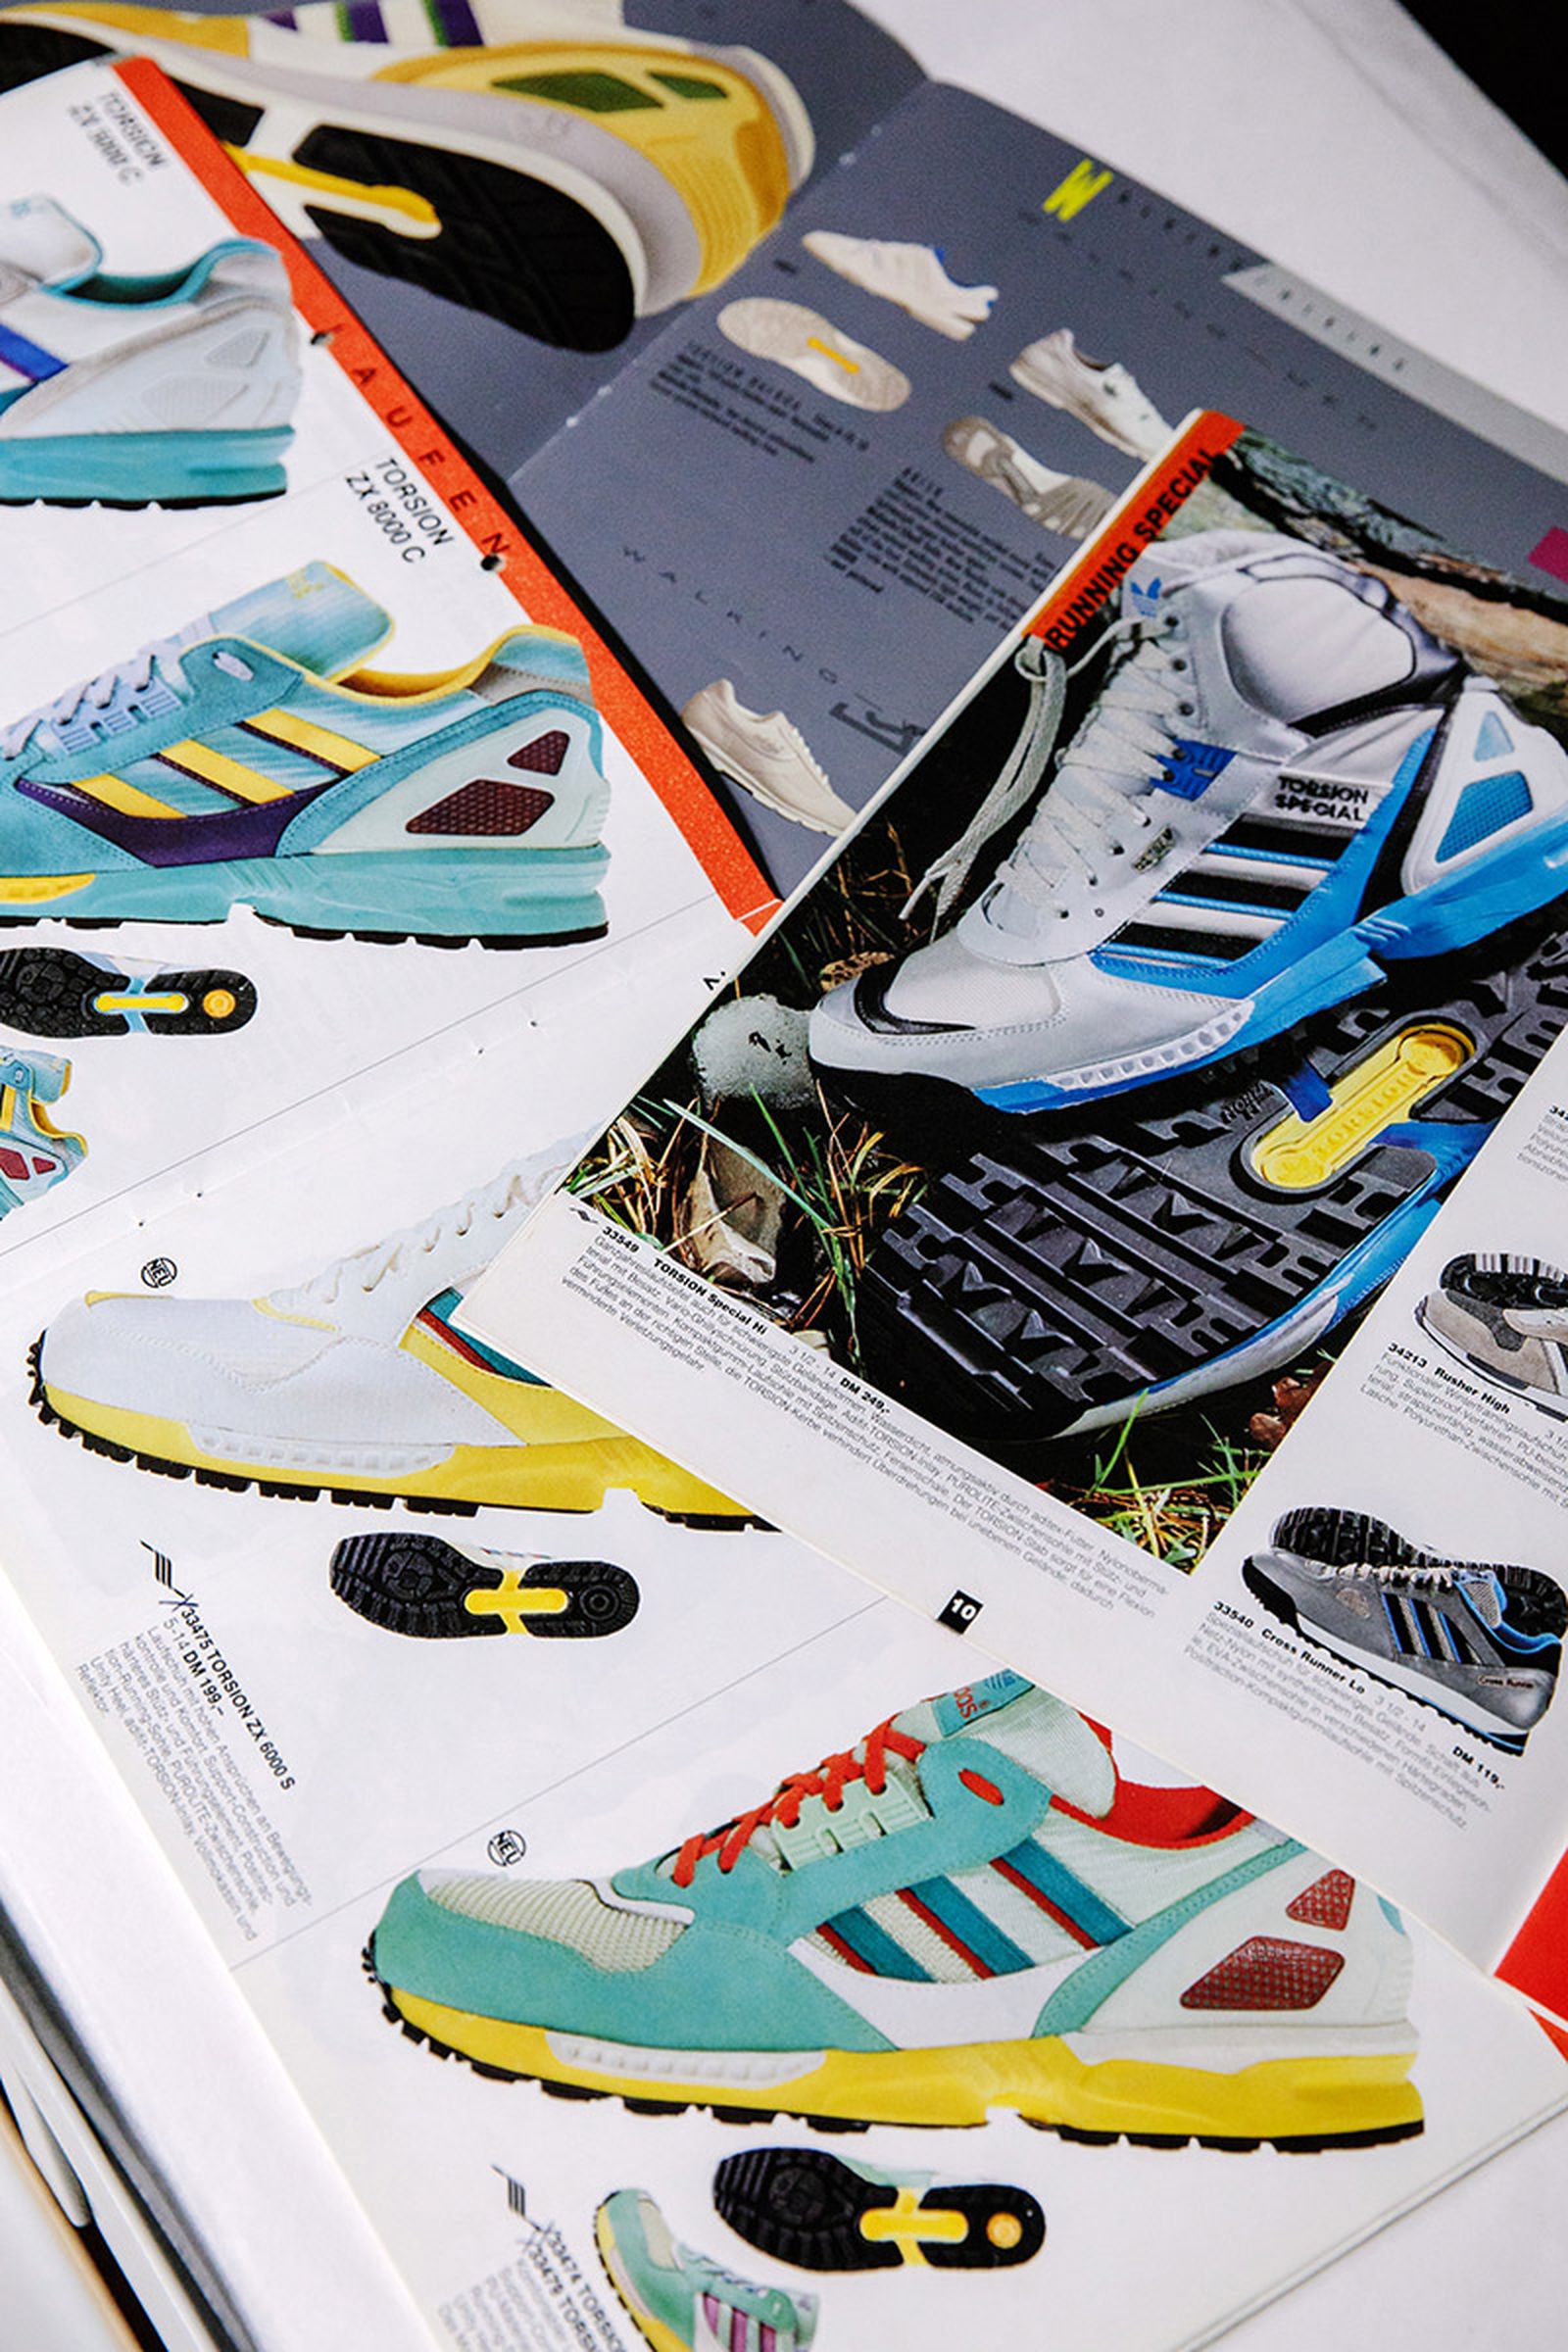 Brief History of the ZX: Innovation, Raves